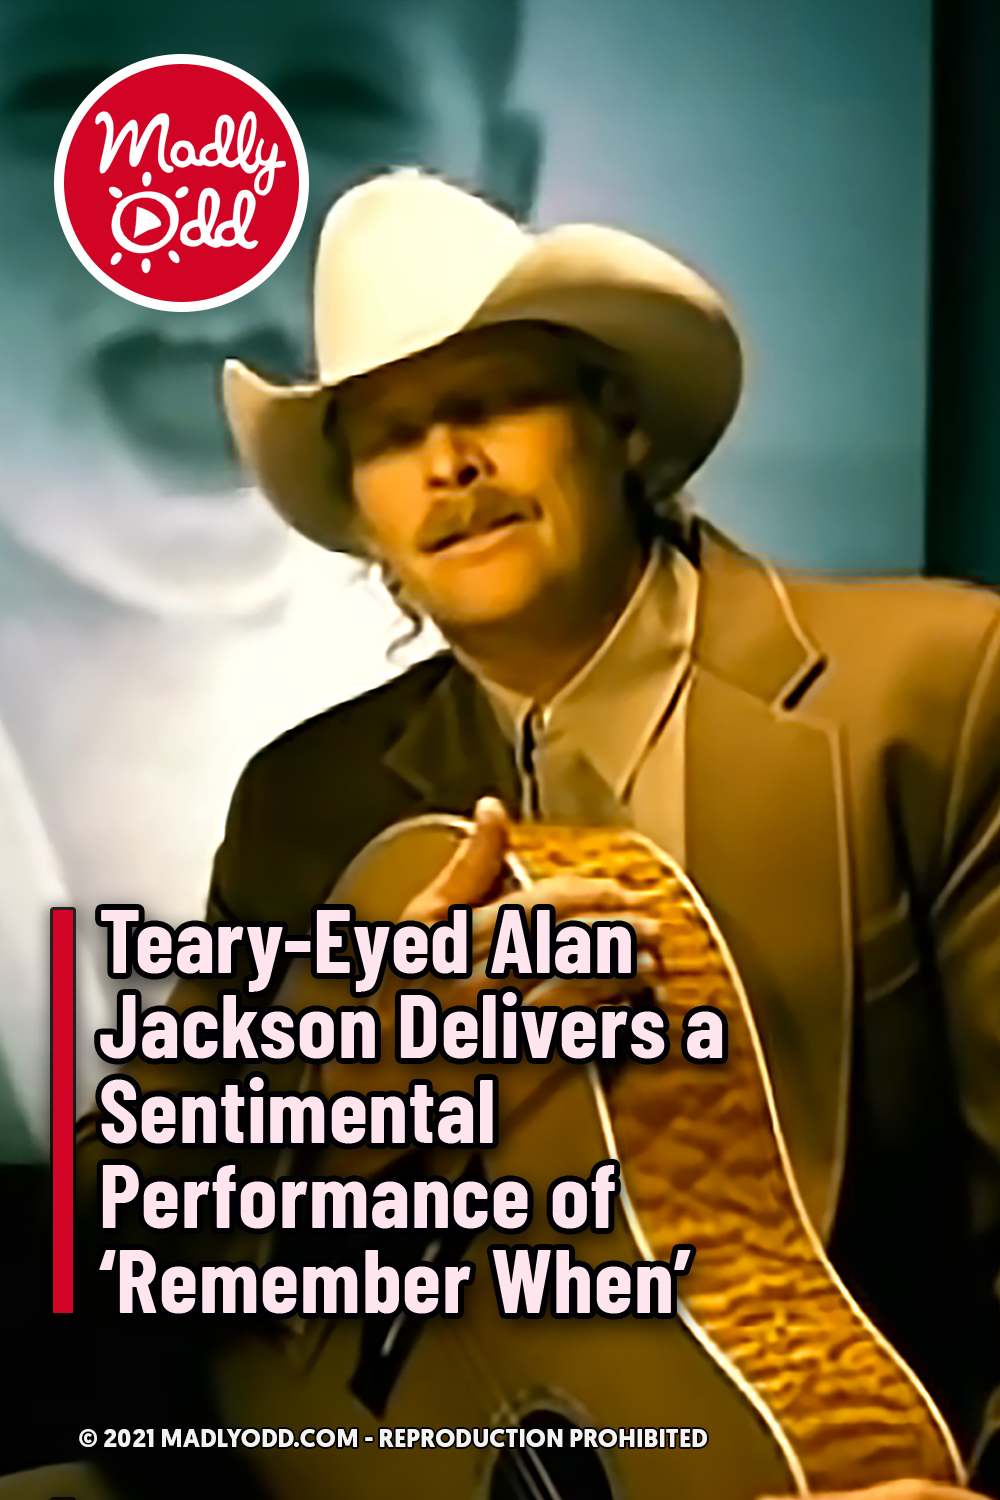 Teary-Eyed Alan Jackson Delivers a Sentimental Performance of ‘Remember When’